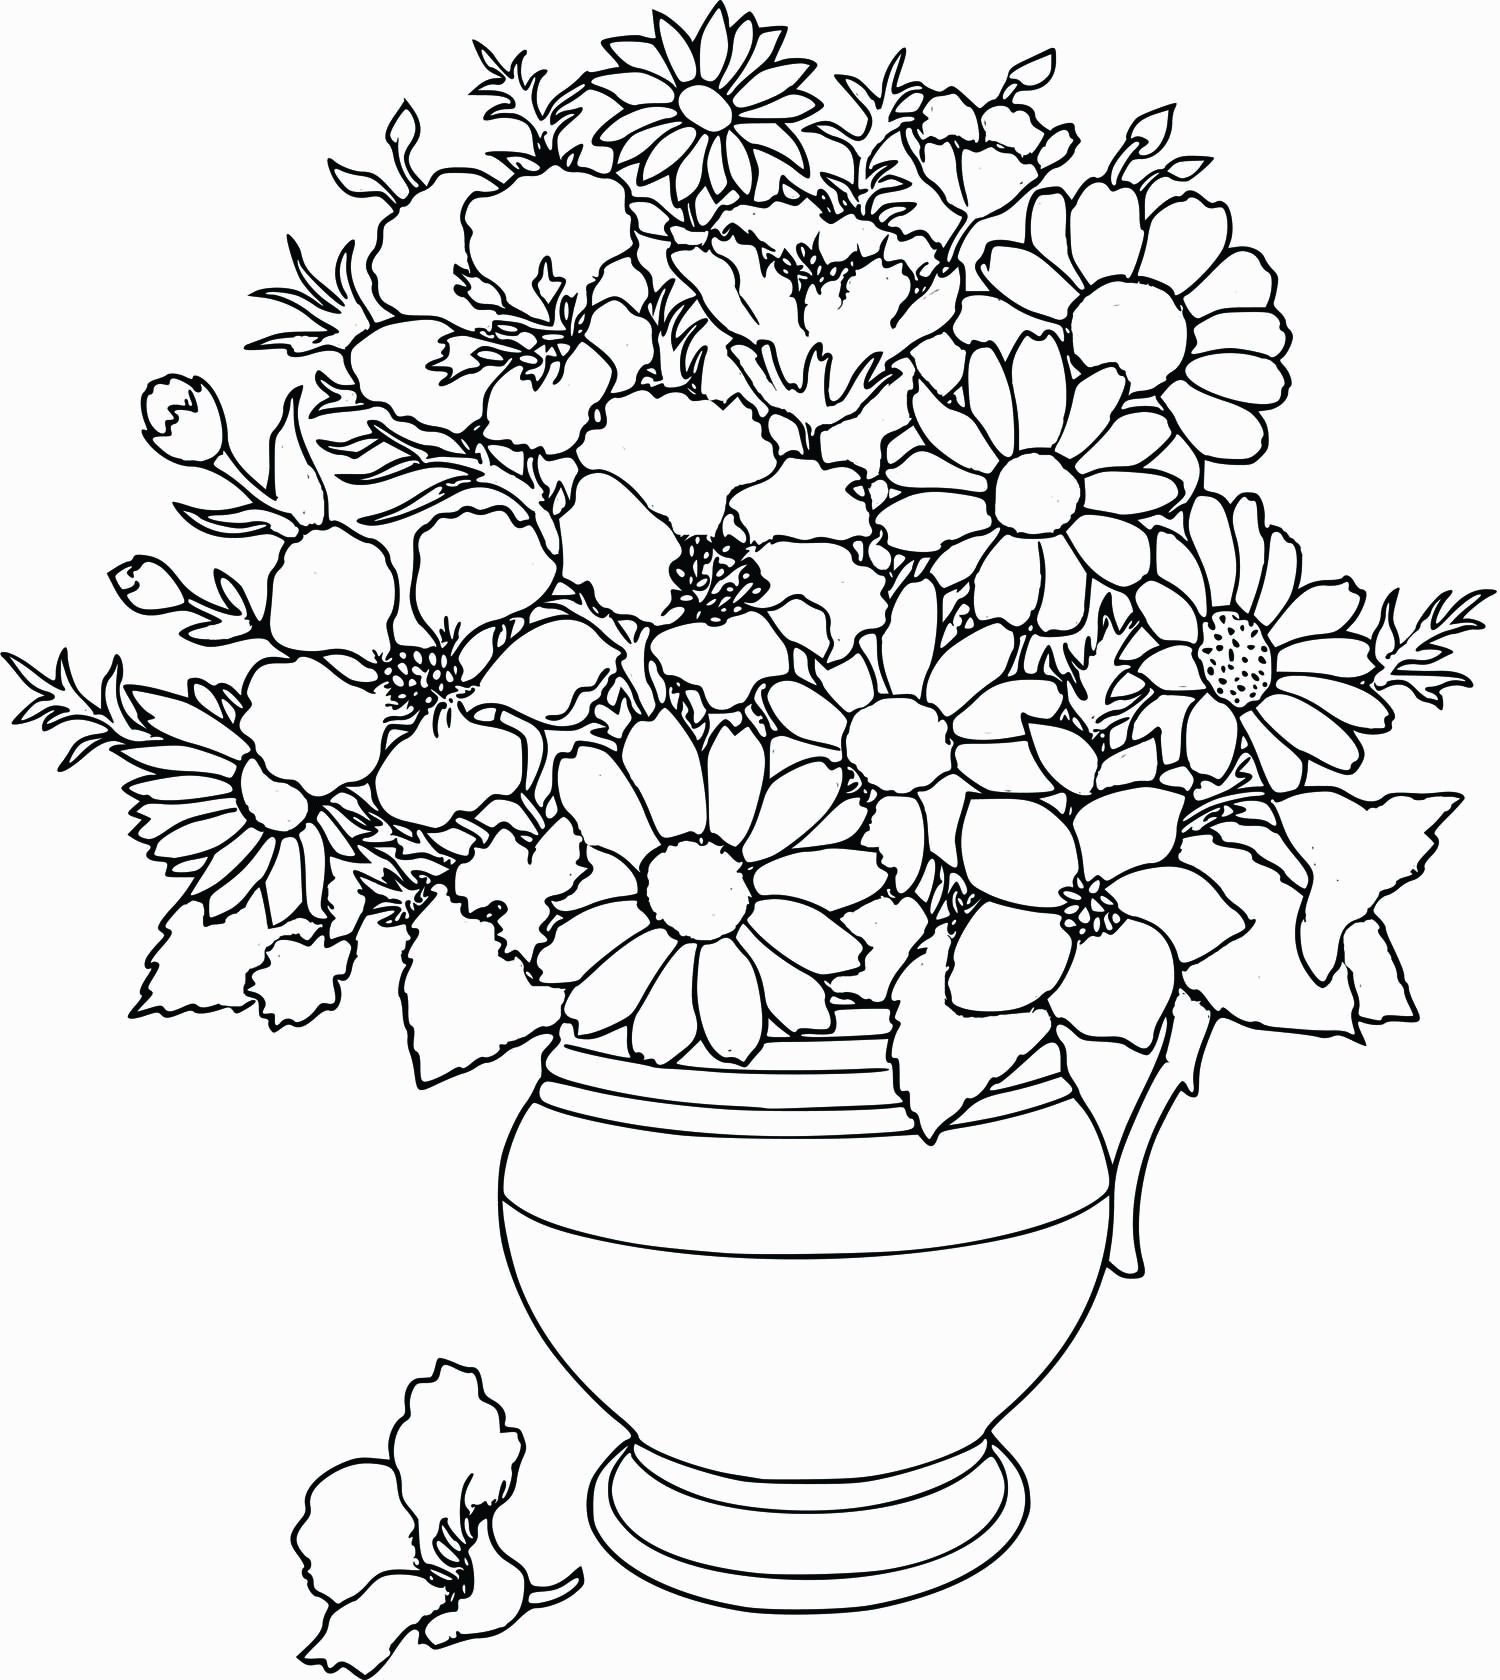 Download Free Flower Petals Coloring Pages - Coloring Home